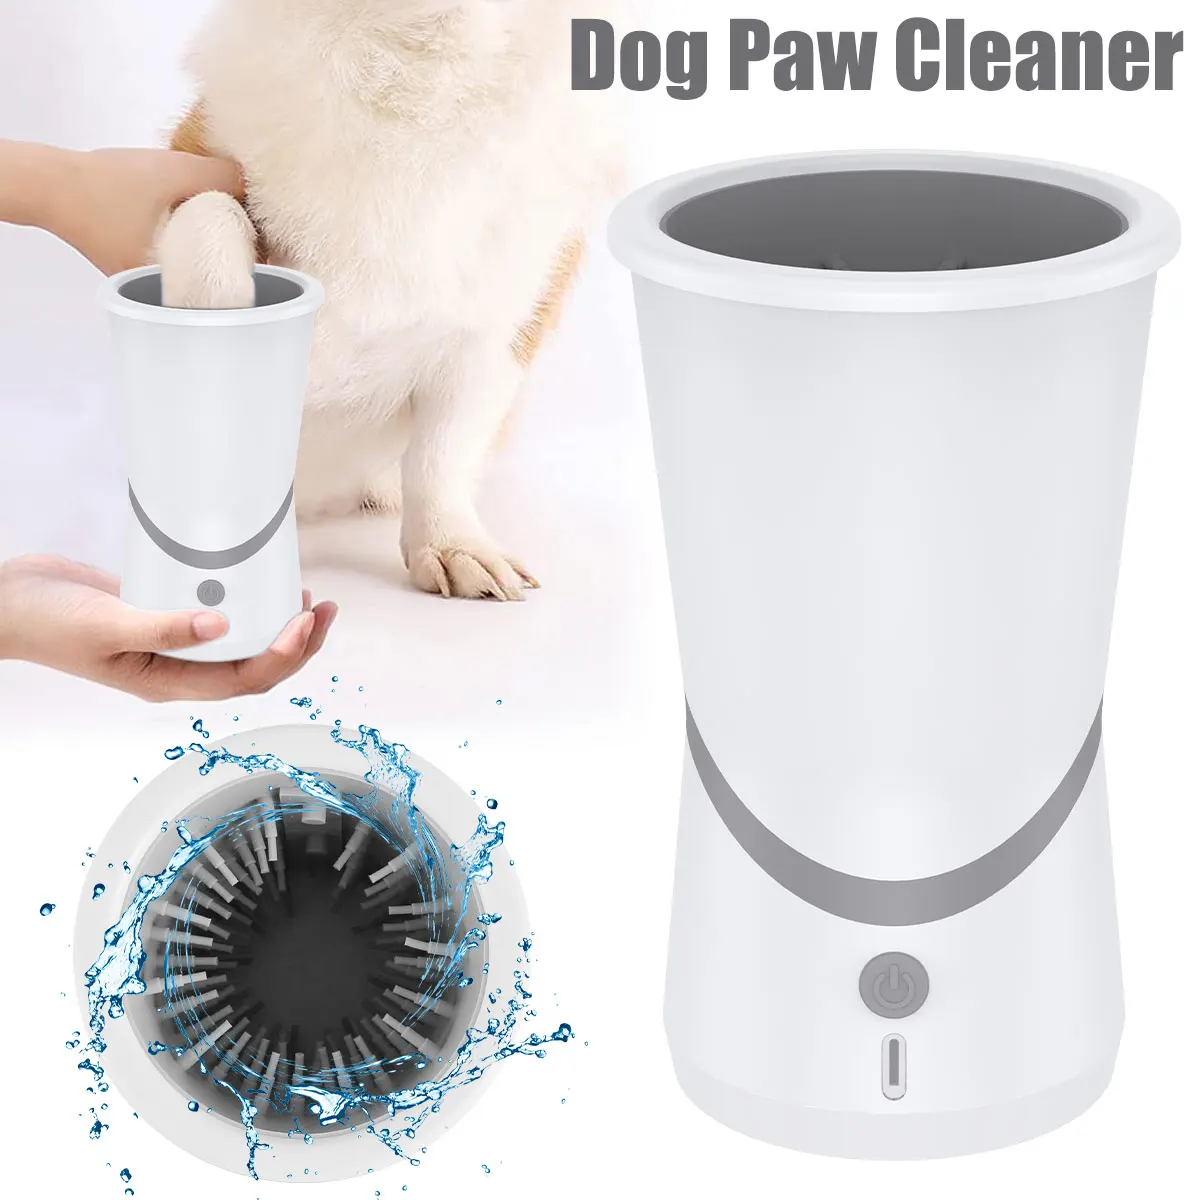 

Dog Paw Cleaner Automatic Pet Paw Washing Cup with Soft Silicone Bristles Portable Detachable Dog Paw Cleaner for Cleaning Muddy